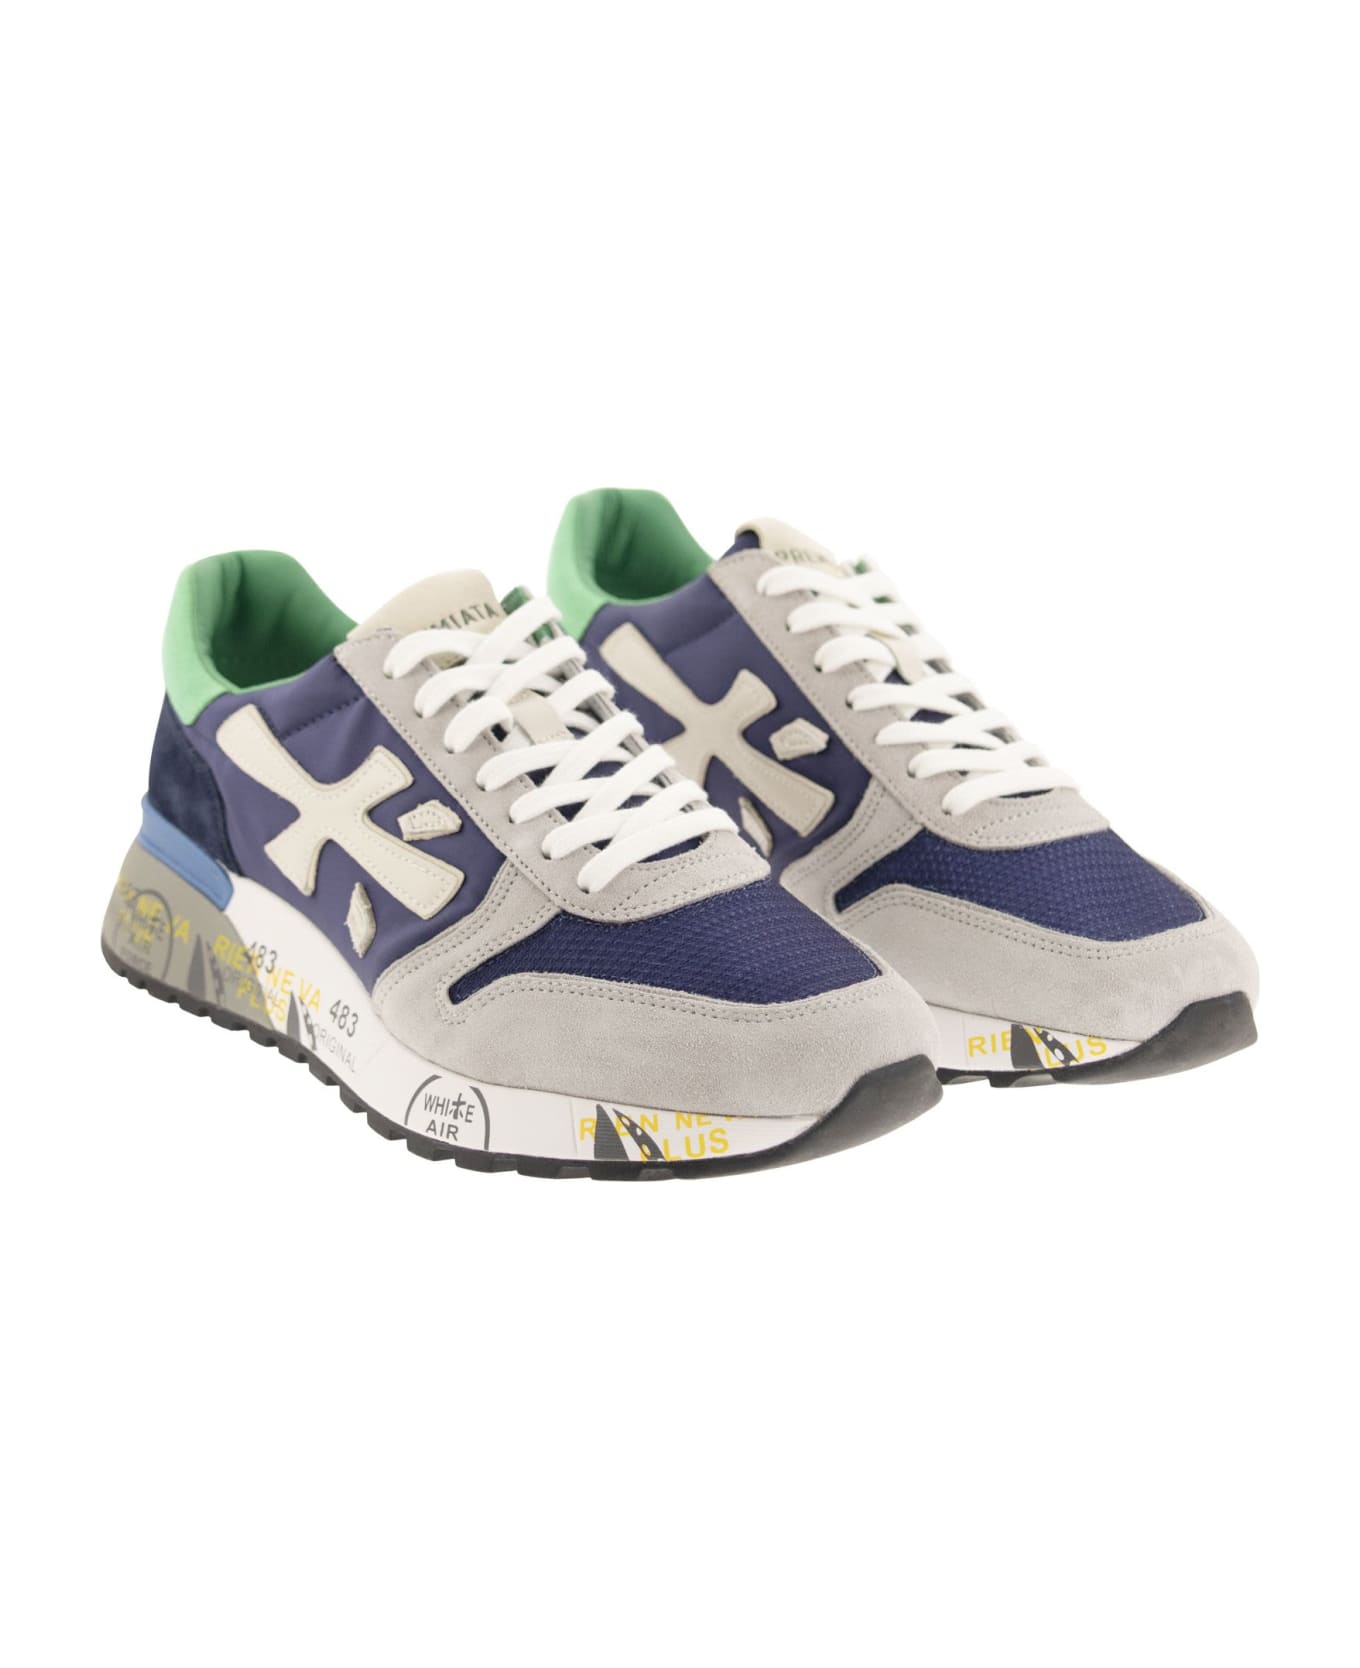 Premiata Mick Sneakers In Blue Suede And Fabric - Blue/green/grey